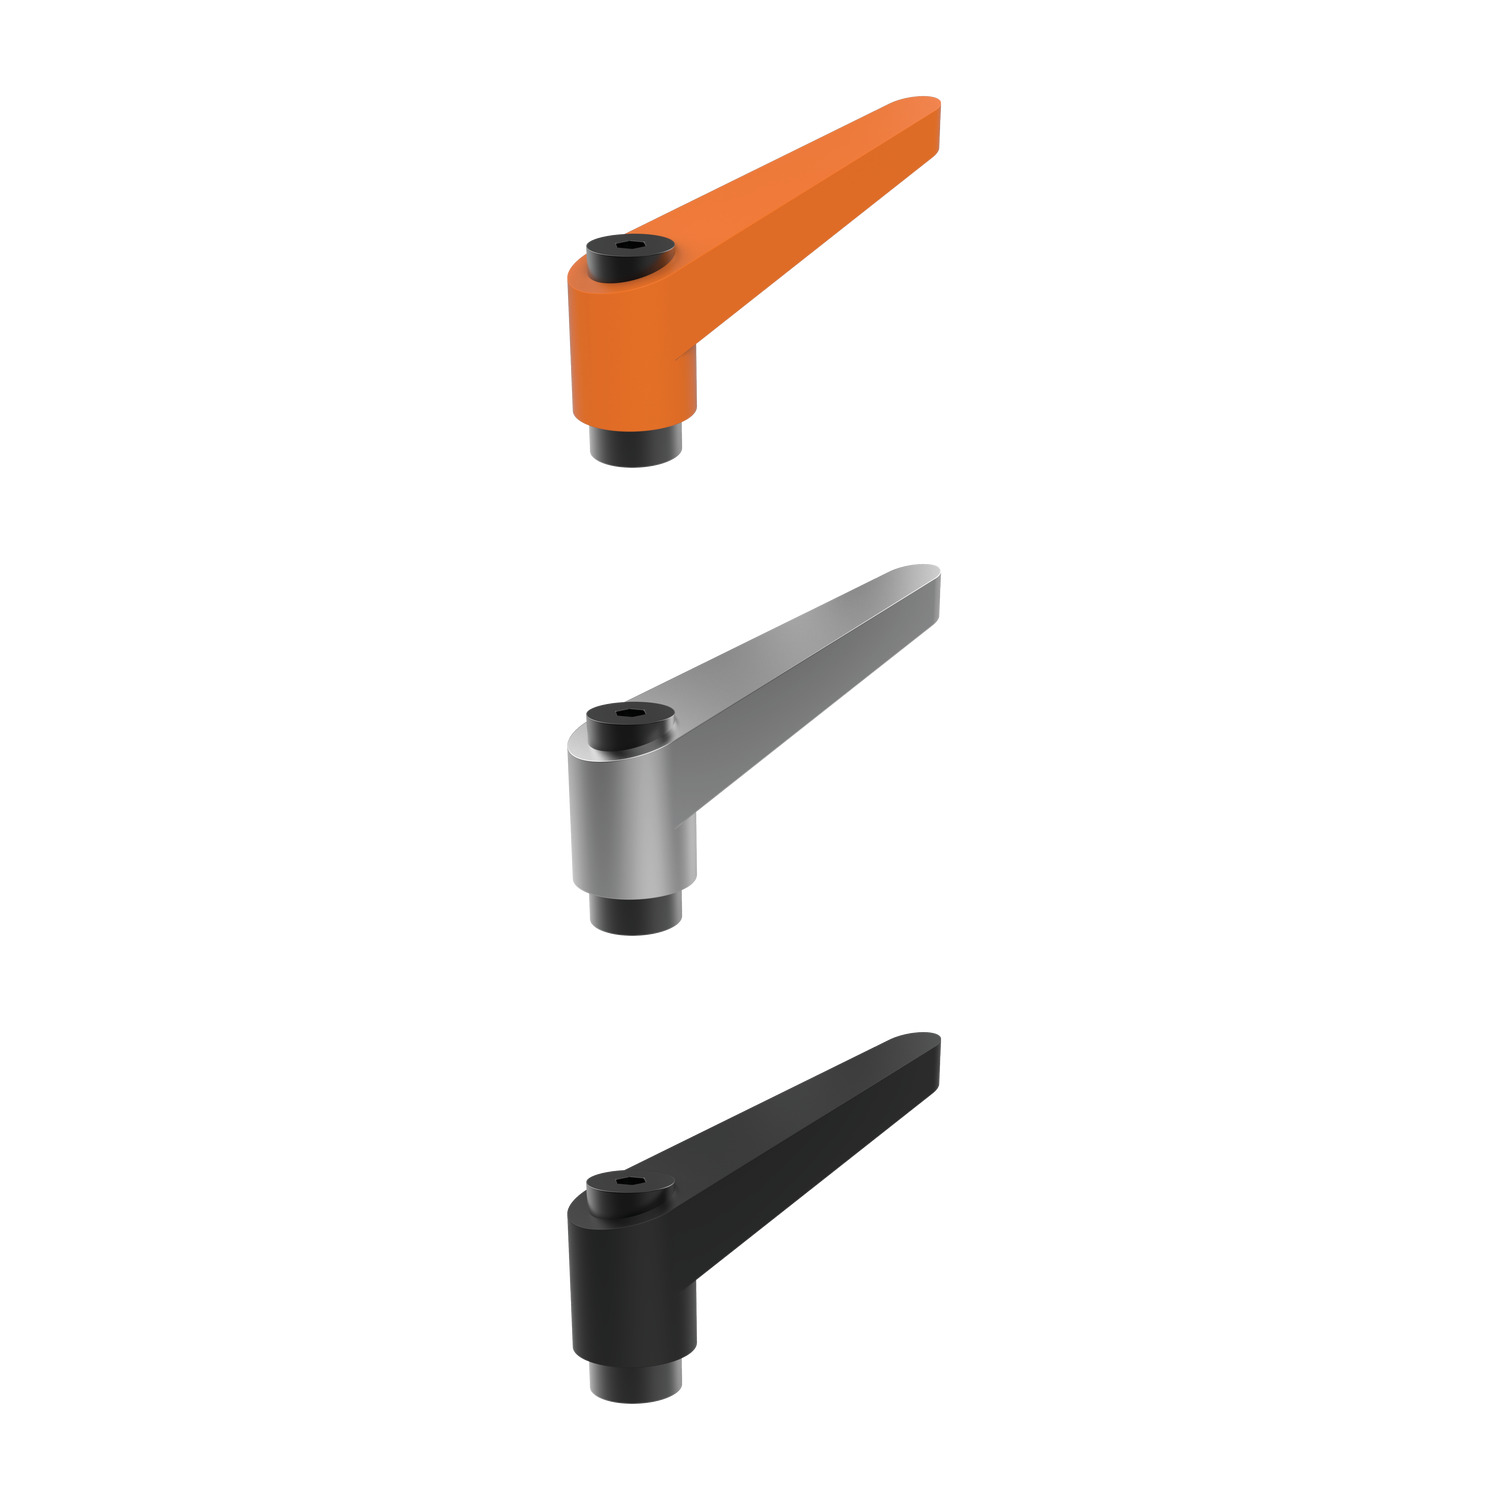 Adjustable Clamping Levers Adjustable clamping levers with threaded bore, made from die-cast zinc and available in three colours. Actuated by lifting the leaver, disengaging the serrations.